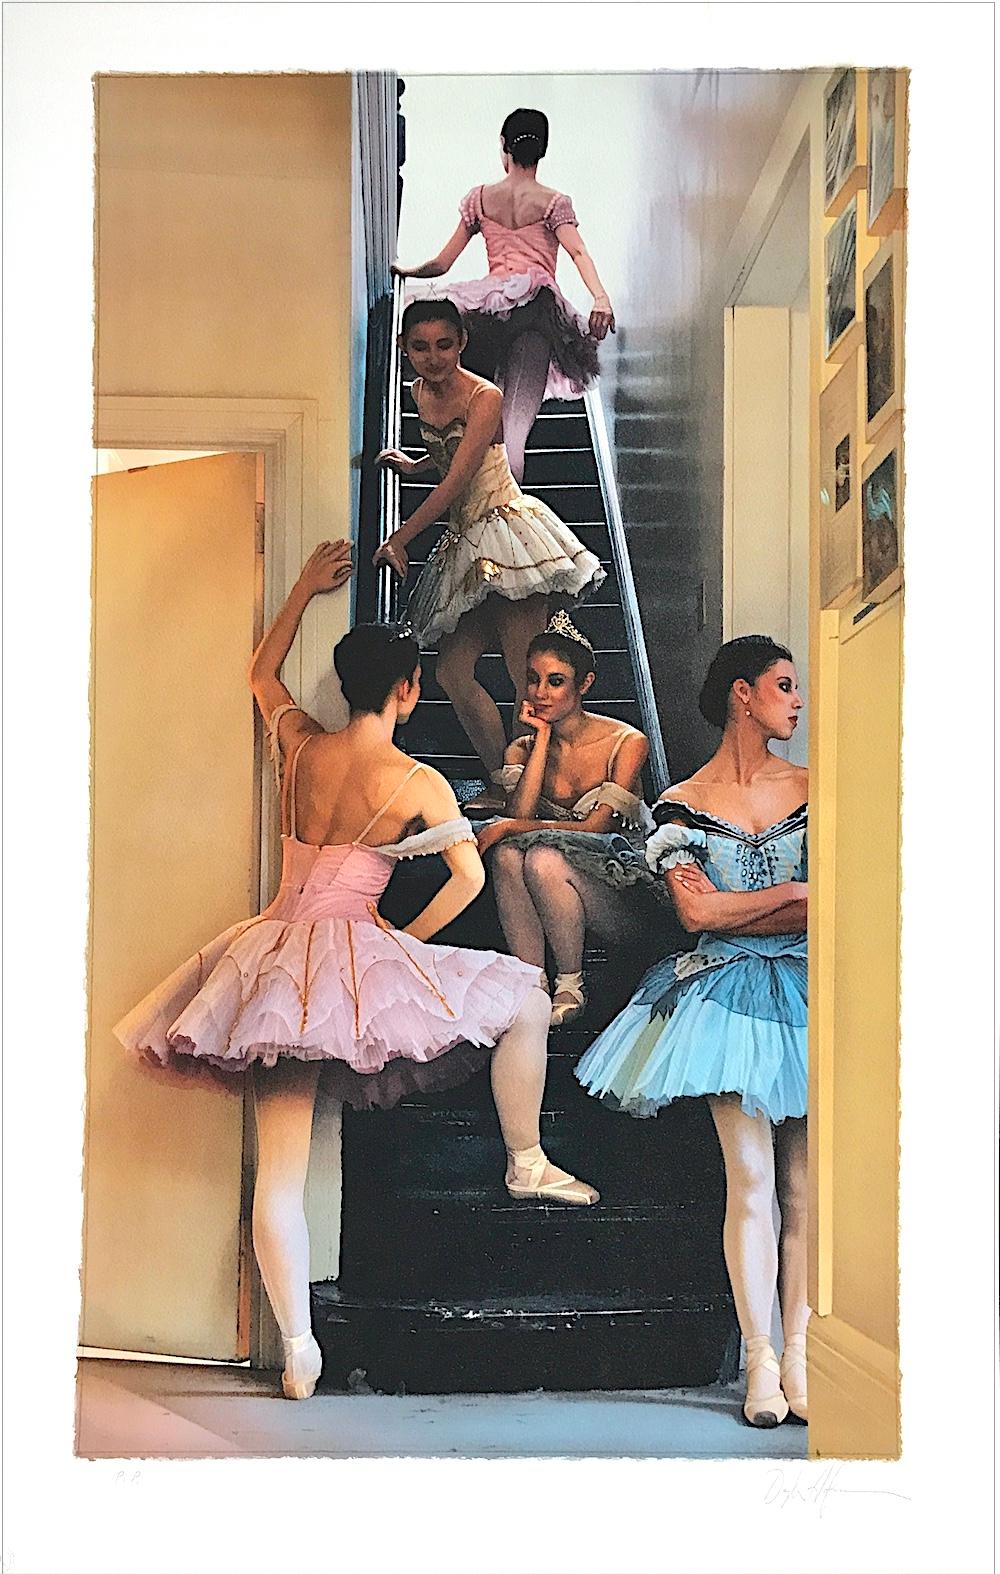 Douglas Hofmann Figurative Print - WAITING IN THE WINGS Signed Lithograph, Ballerinas in Stairwell, Pink Blue Tutus